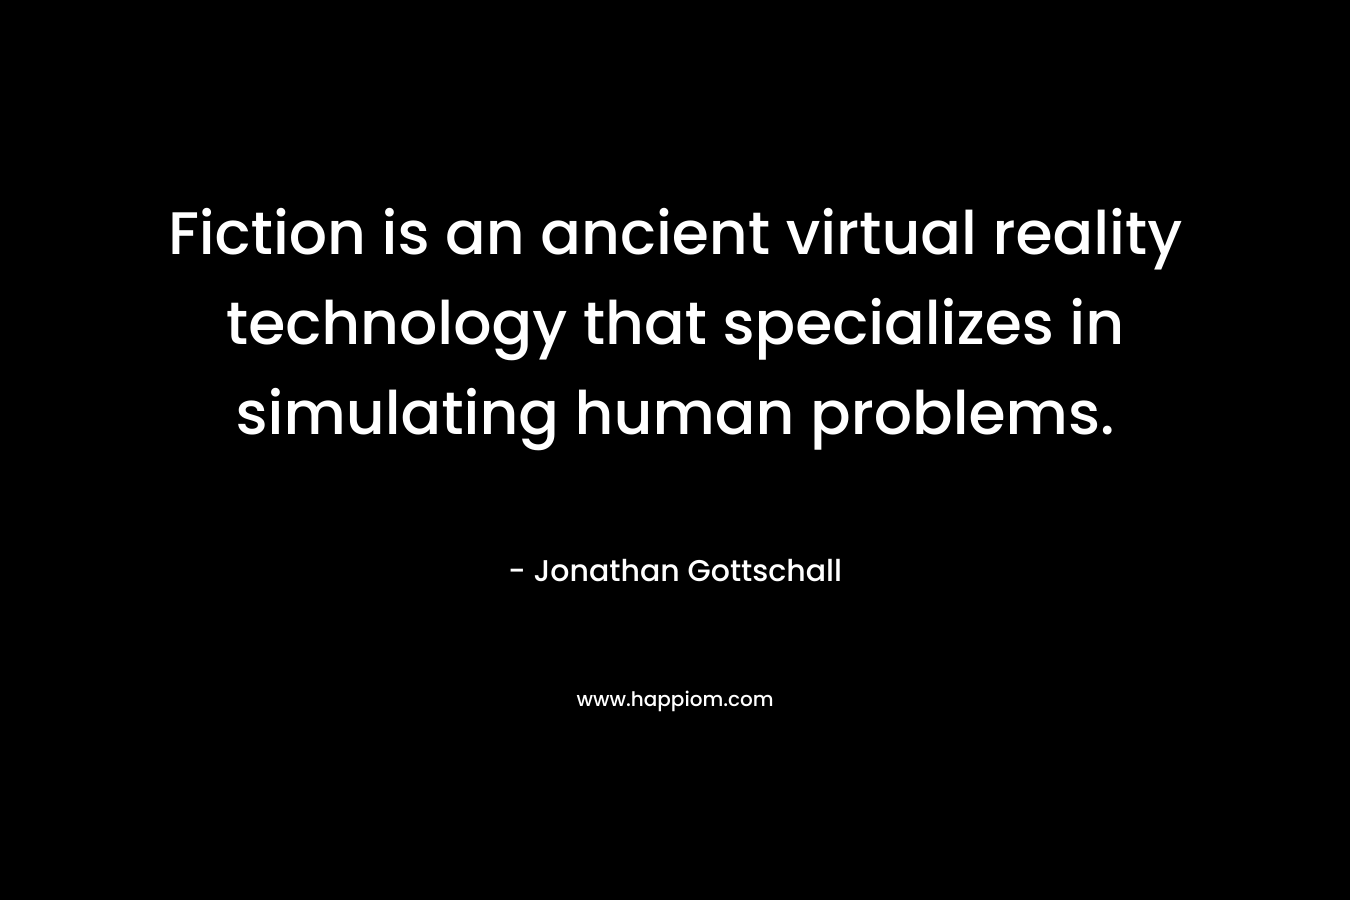 Fiction is an ancient virtual reality technology that specializes in simulating human problems.